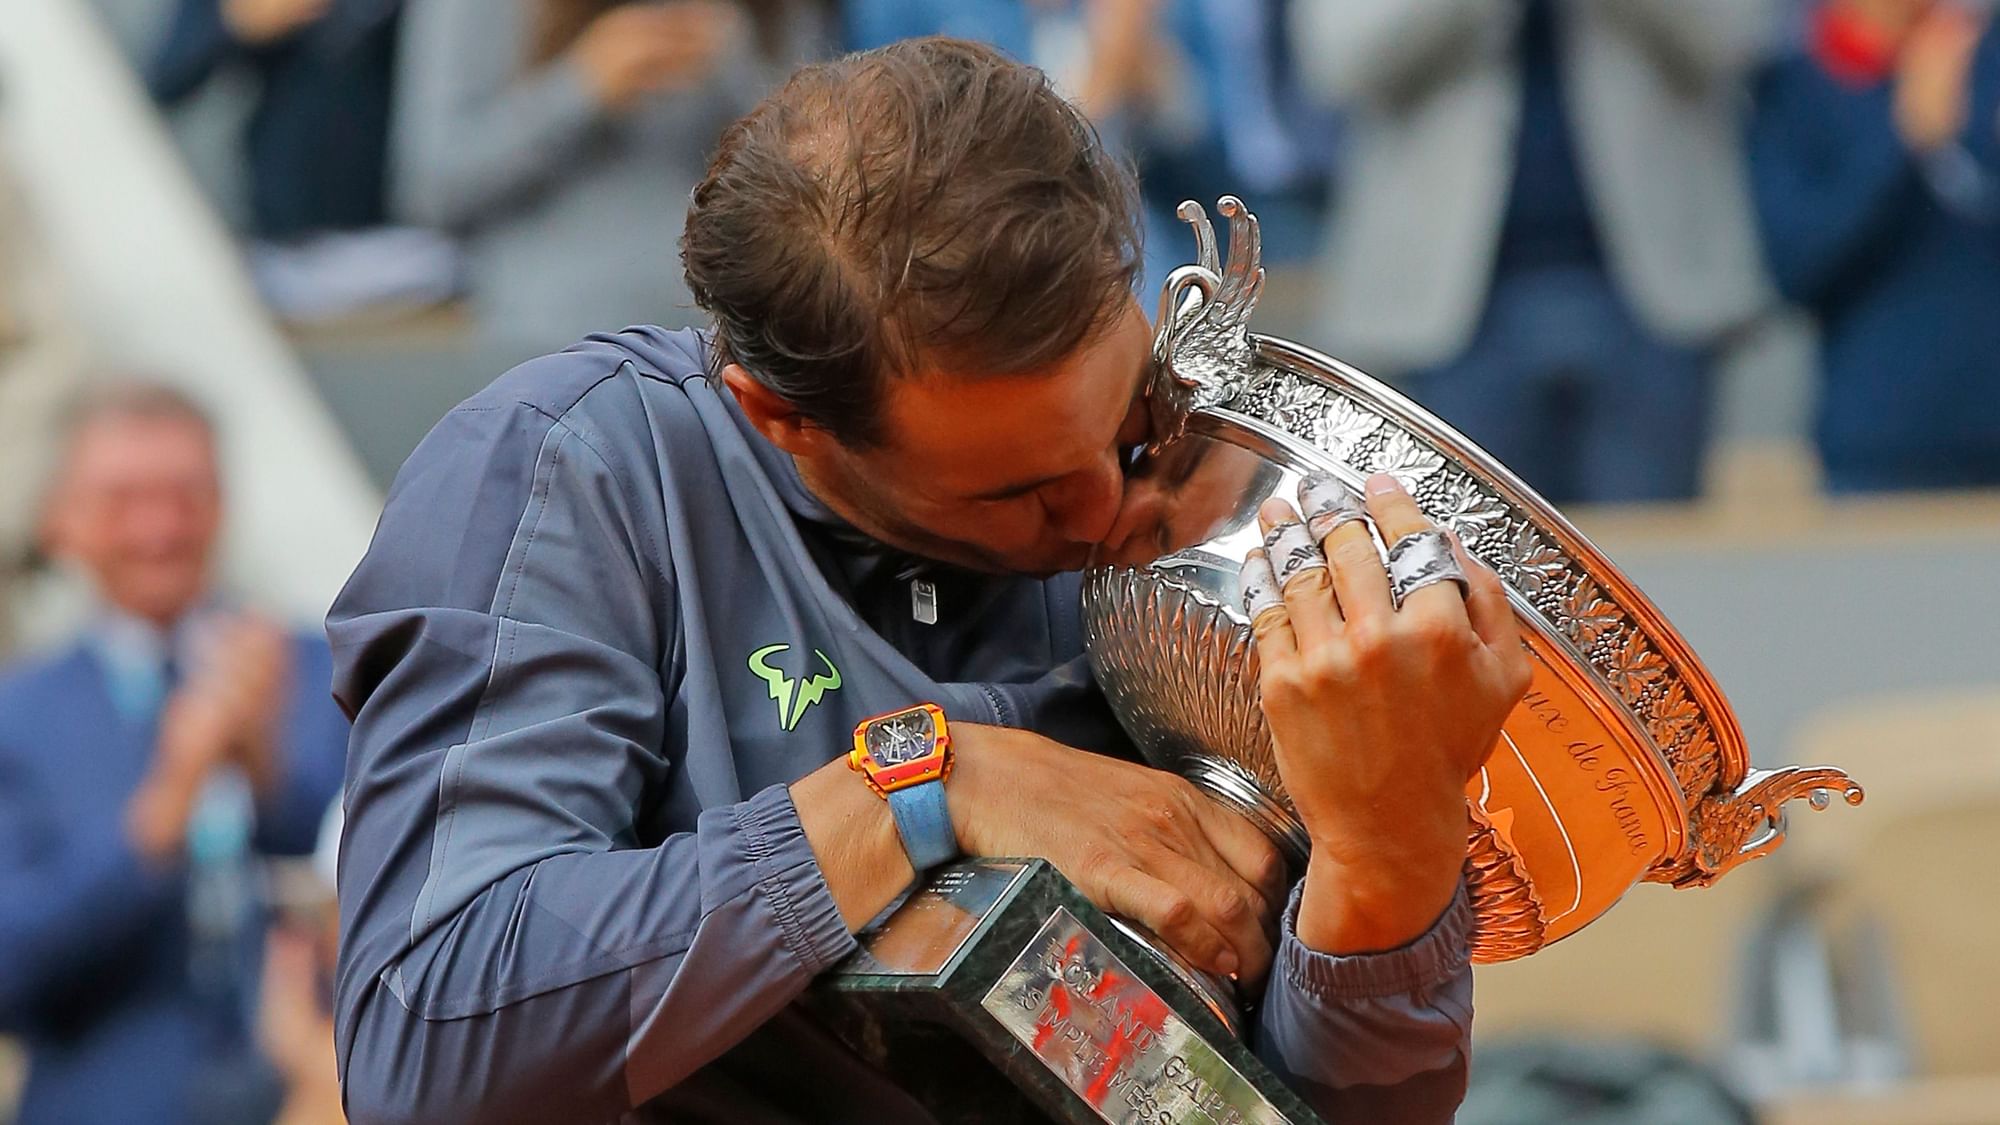 Spain’s Rafael Nadal celebrates his record 12th French Open tennis tournament title after winning his men’s final match against Austria’s Dominic Thiem in four sets, 6-3, 5-7, 6-1, 6-1, at the Roland Garros stadium in Paris, Sunday, June 9, 2019.&nbsp;